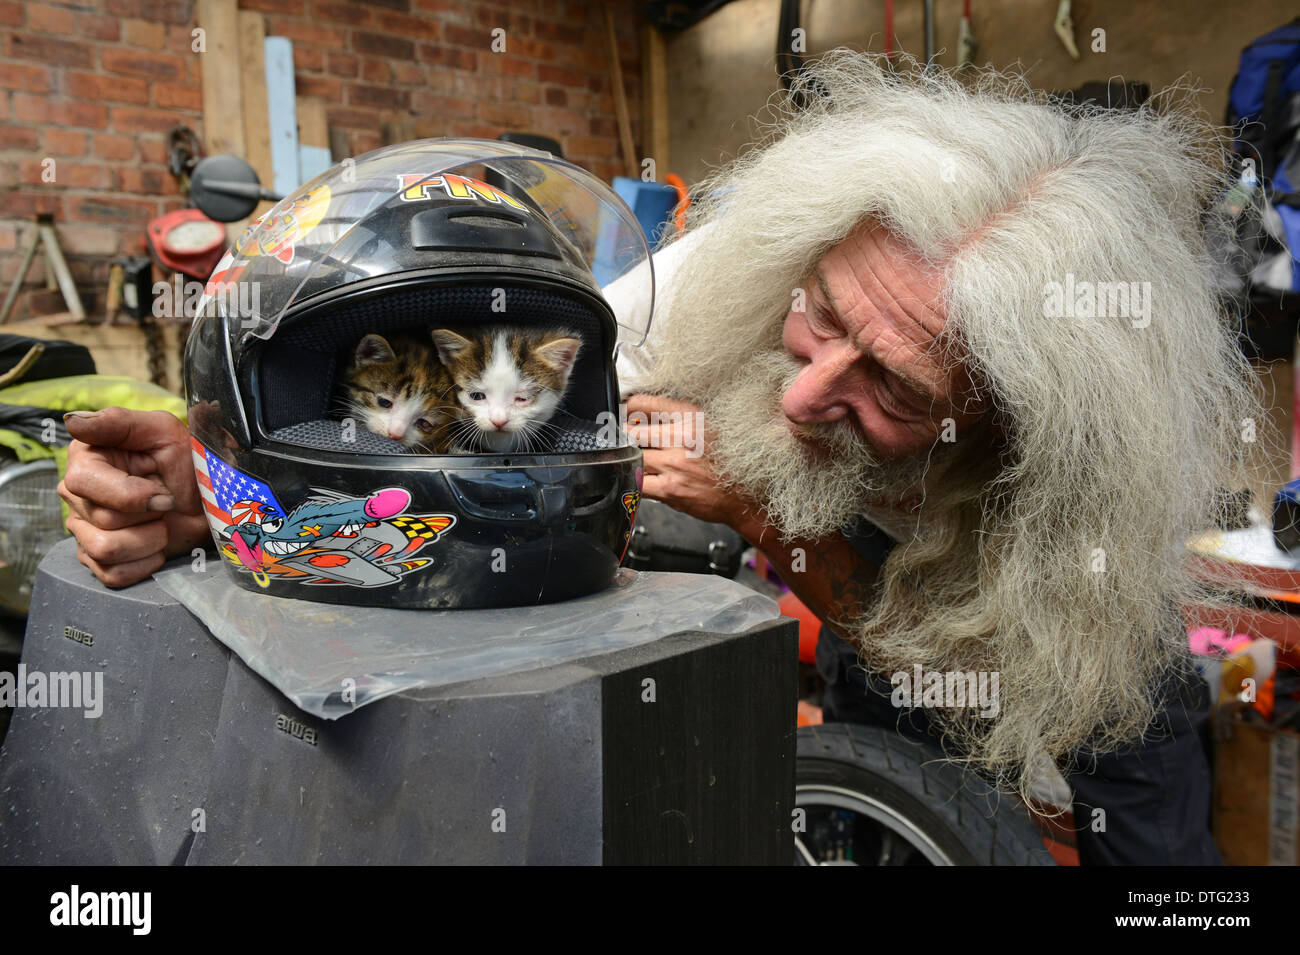 Man with long hair and beard John Julian with two kittens he found in his shed inside his motorcycle helmet. kind animal lovers kitten rescue rescued Stock Photo